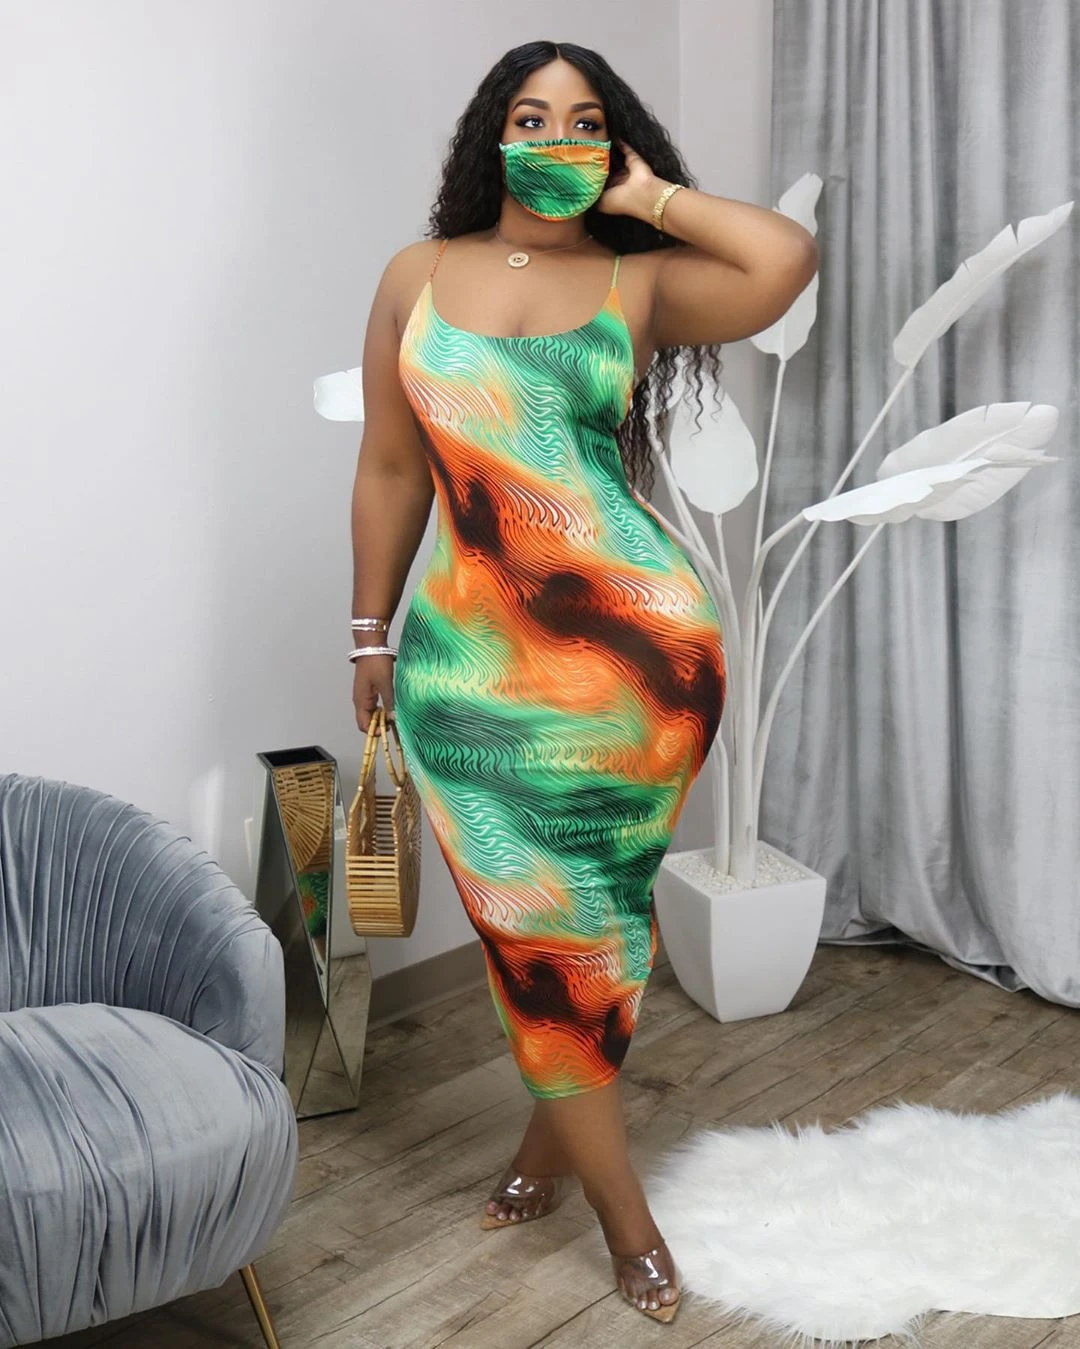 H1351  New hot summer dress with printed sexy dress